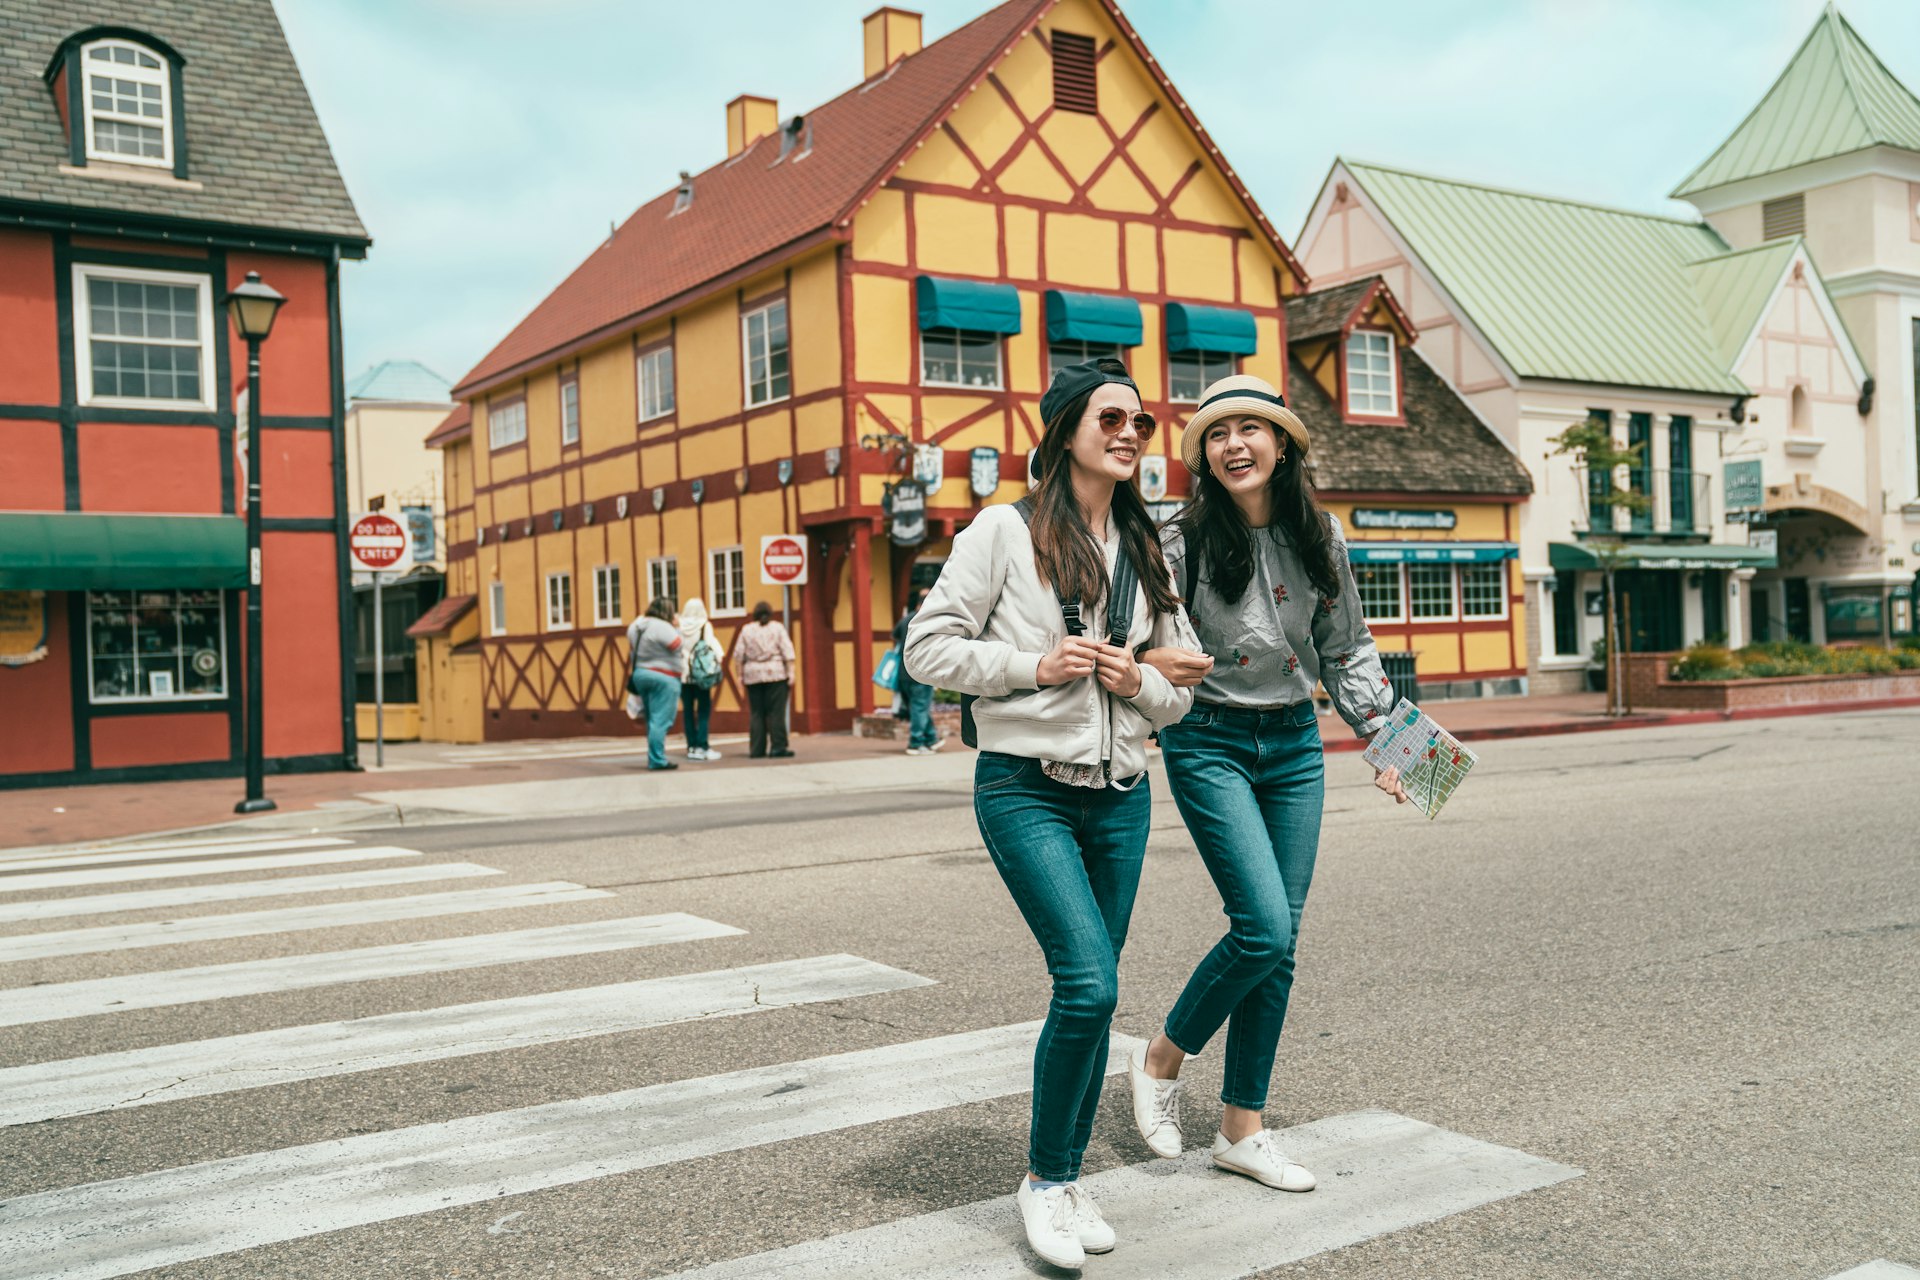 Two women walk across a road lined with buildings with Danish-style architecture